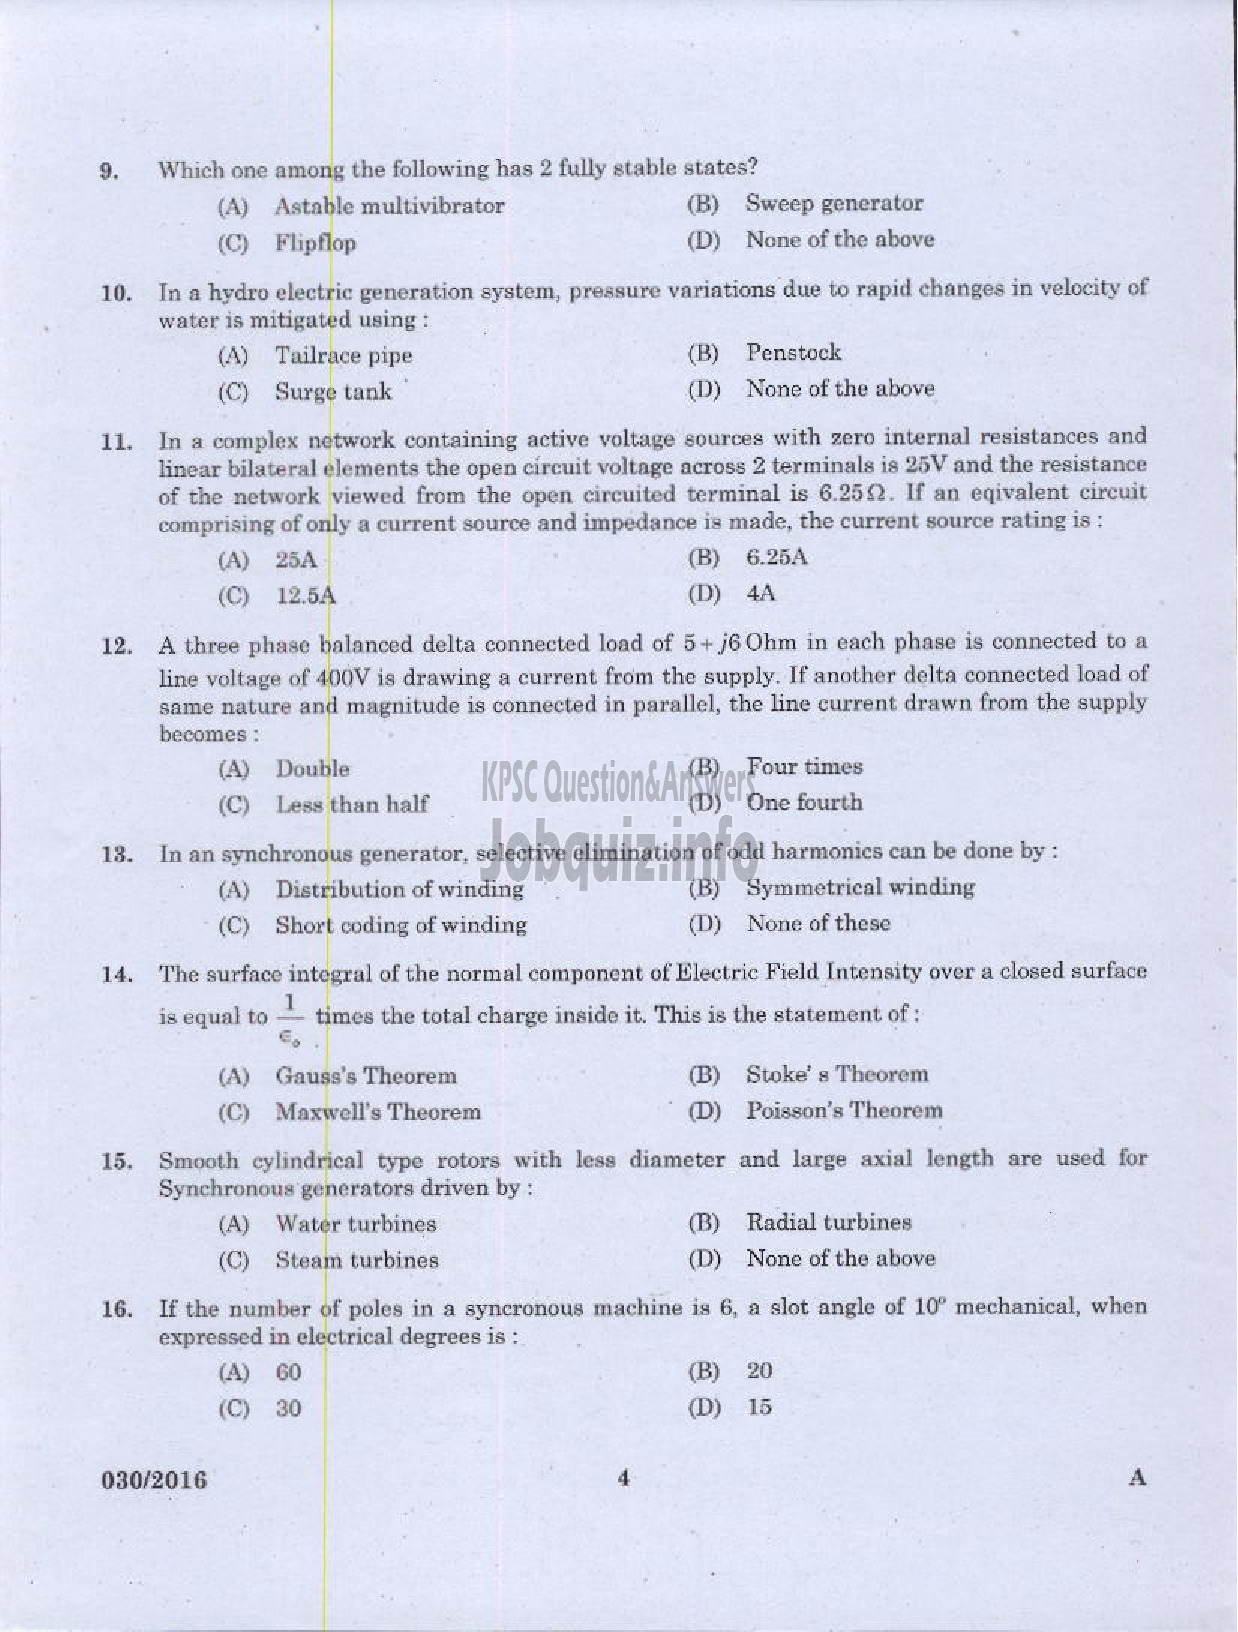 Kerala PSC Question Paper - ASSISTANT ENGINEER ELECTRICAL HARBOUR ENGINEERING-2